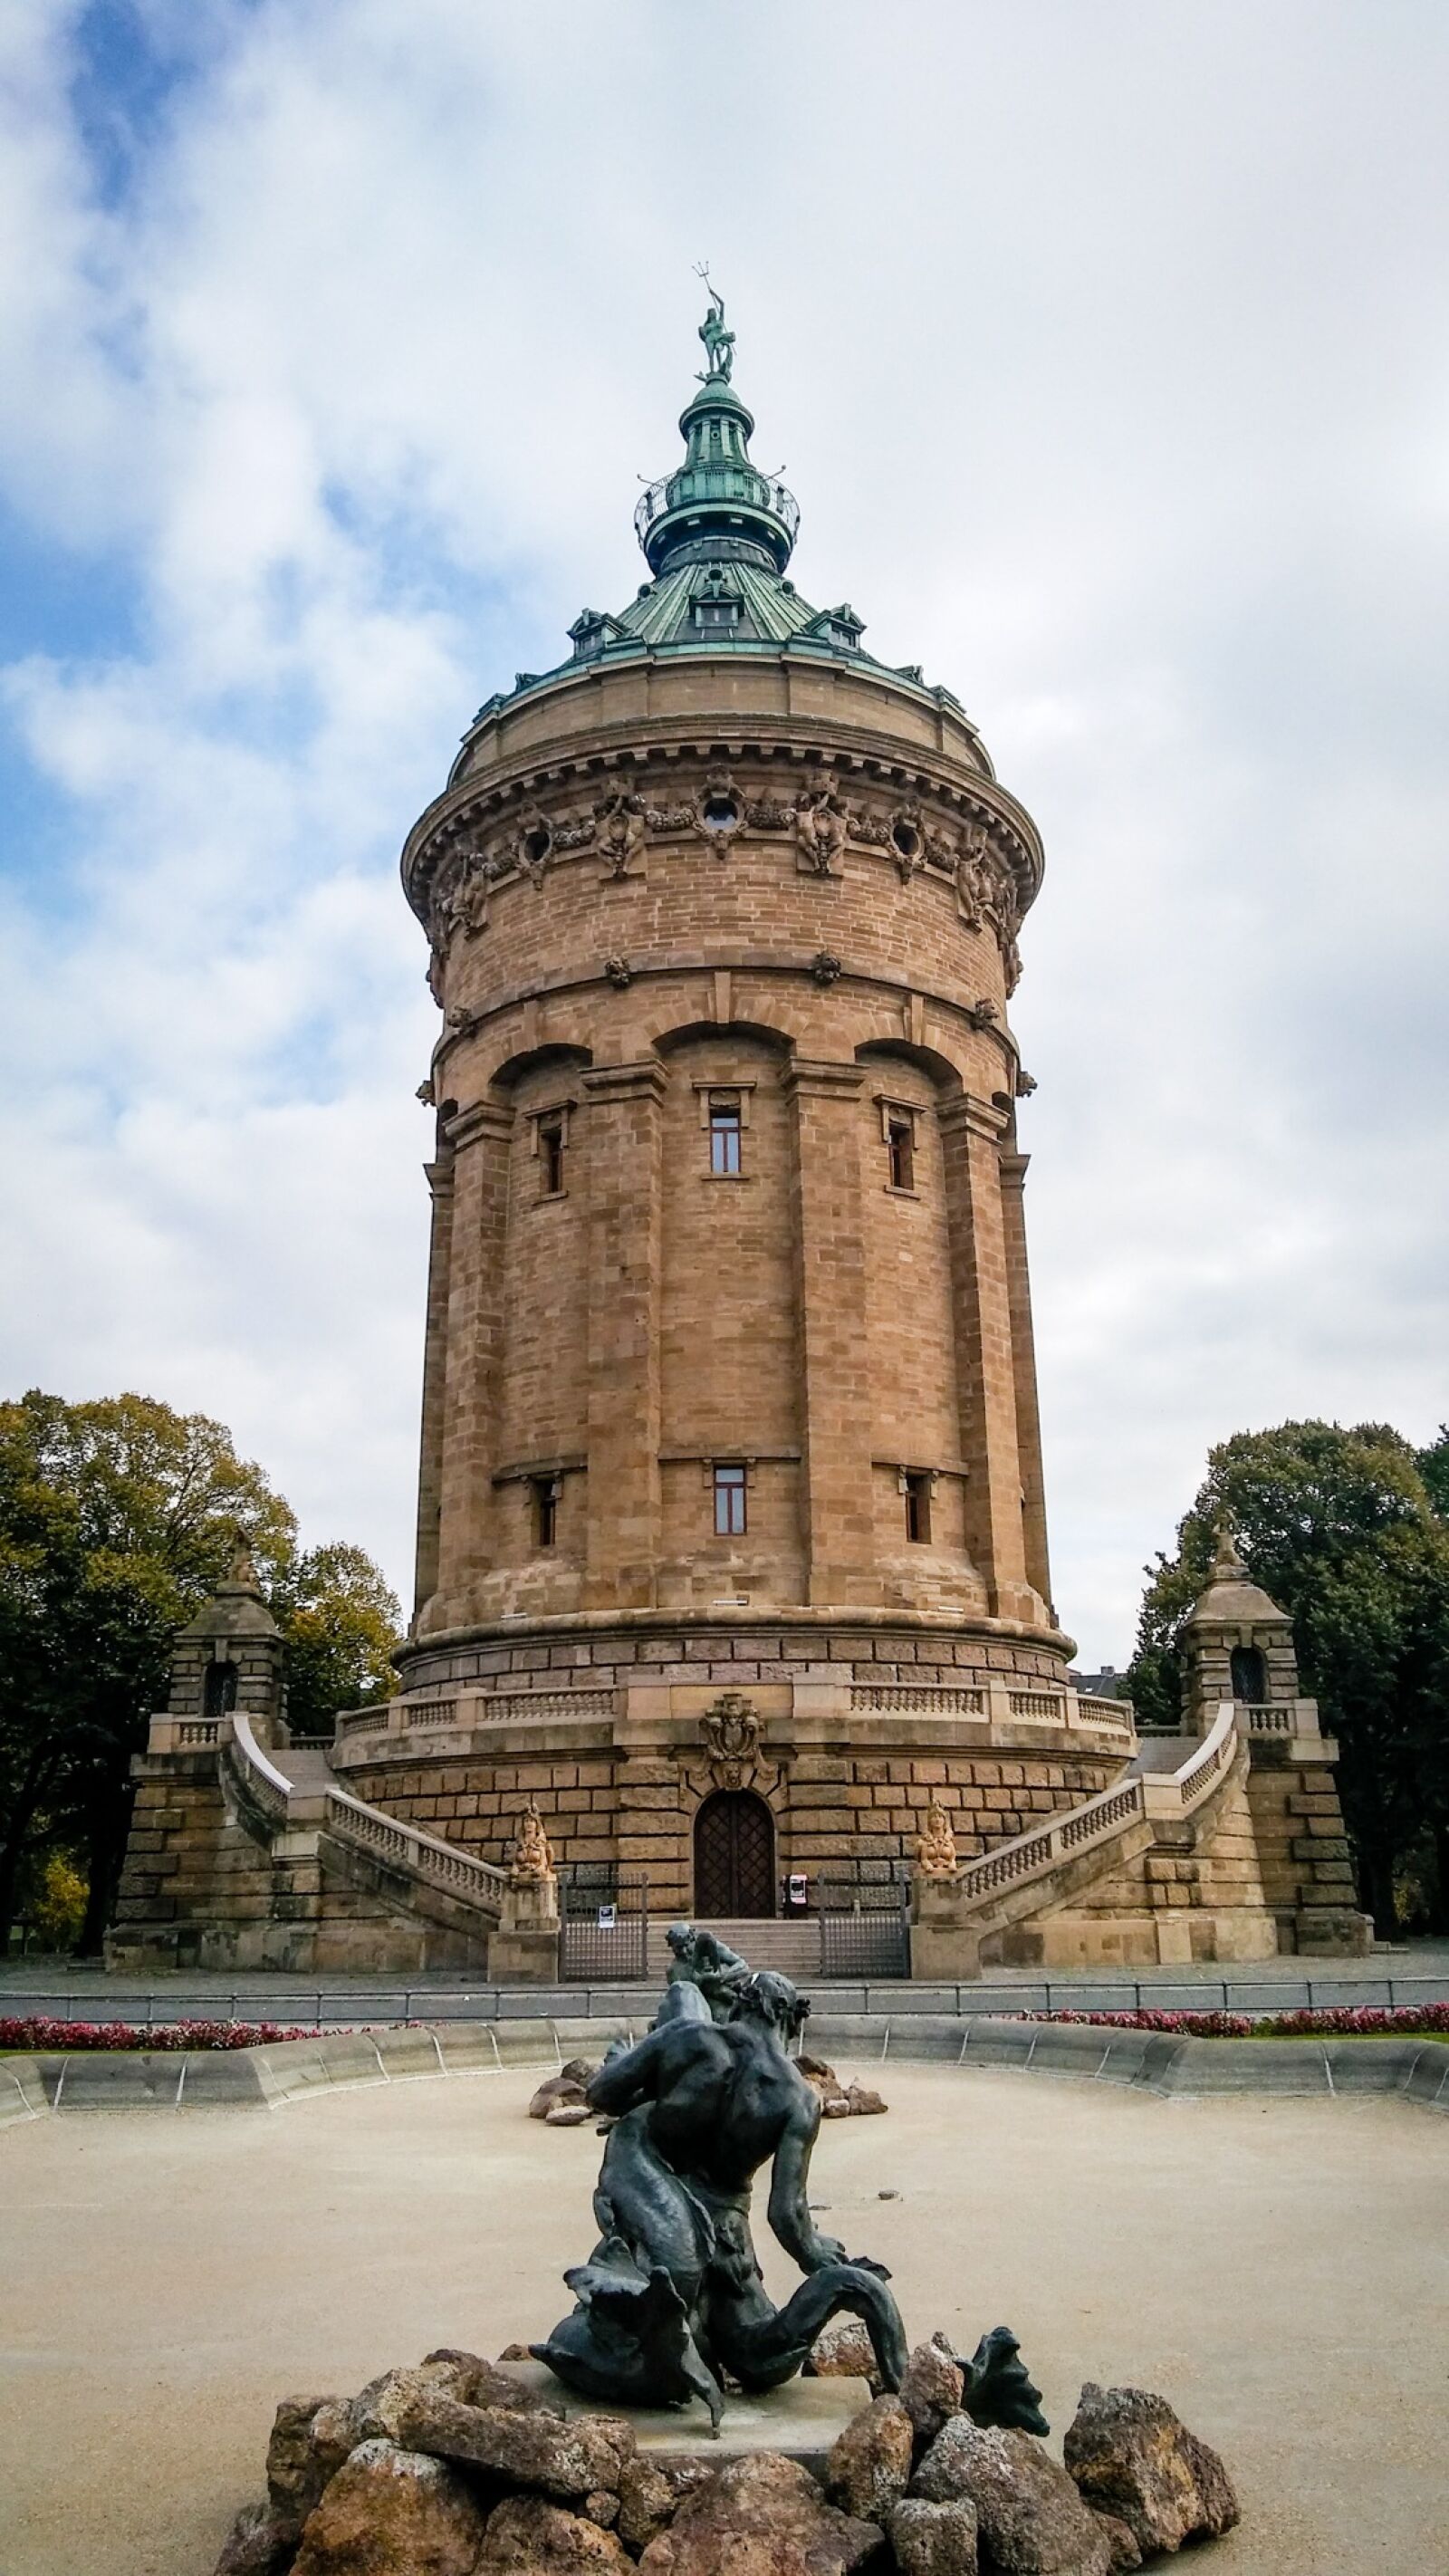 LG K10 sample photo. Mannheim, water tower, architecture photography